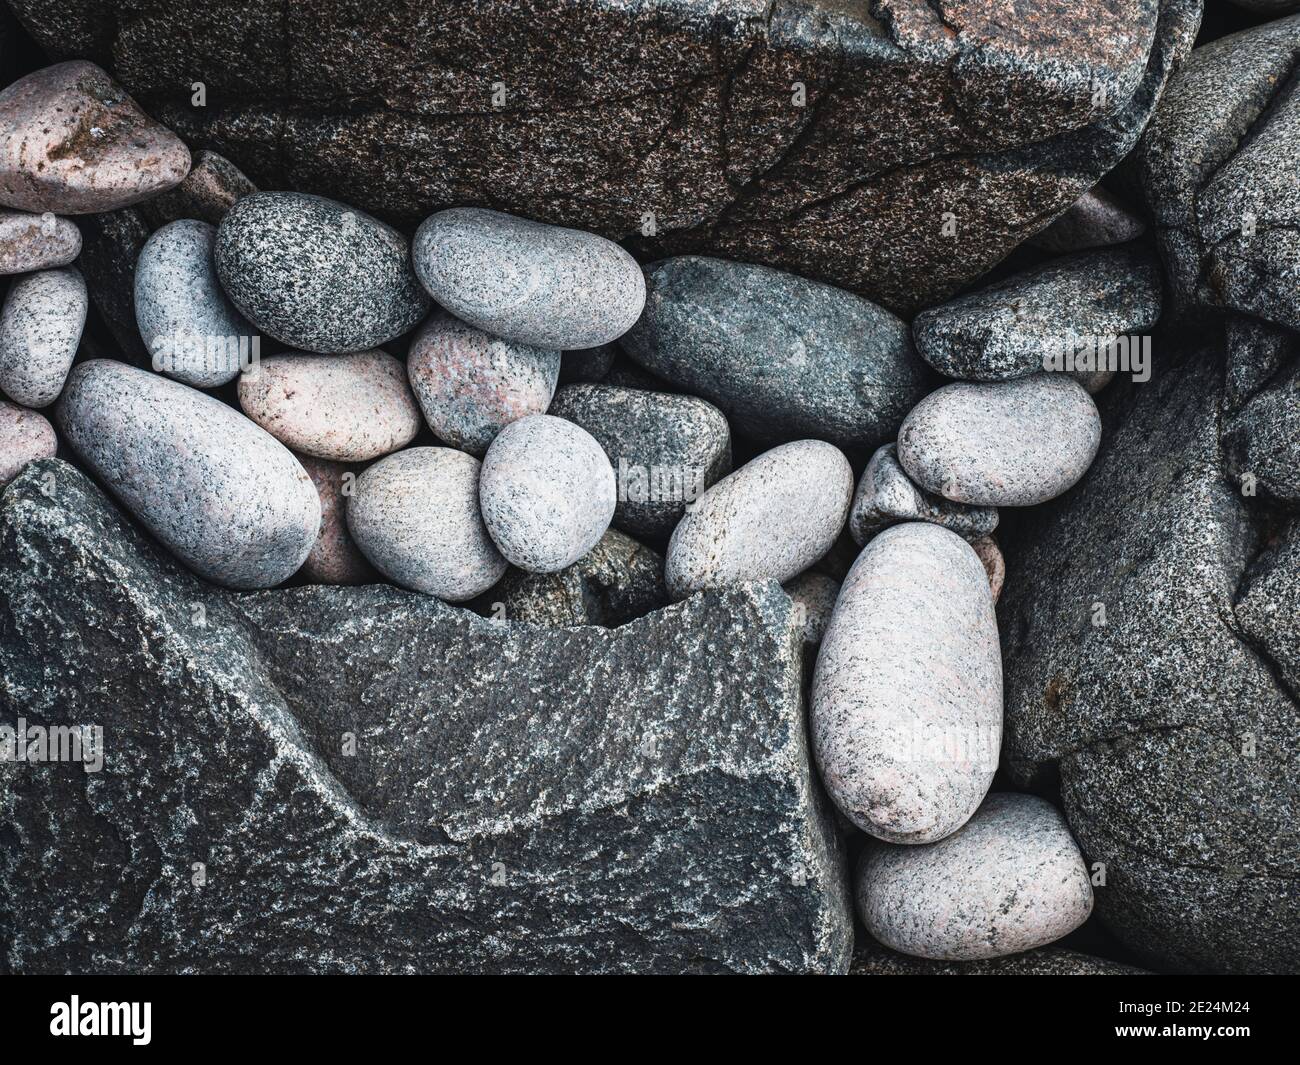 High angle view of Pebbles Banque D'Images